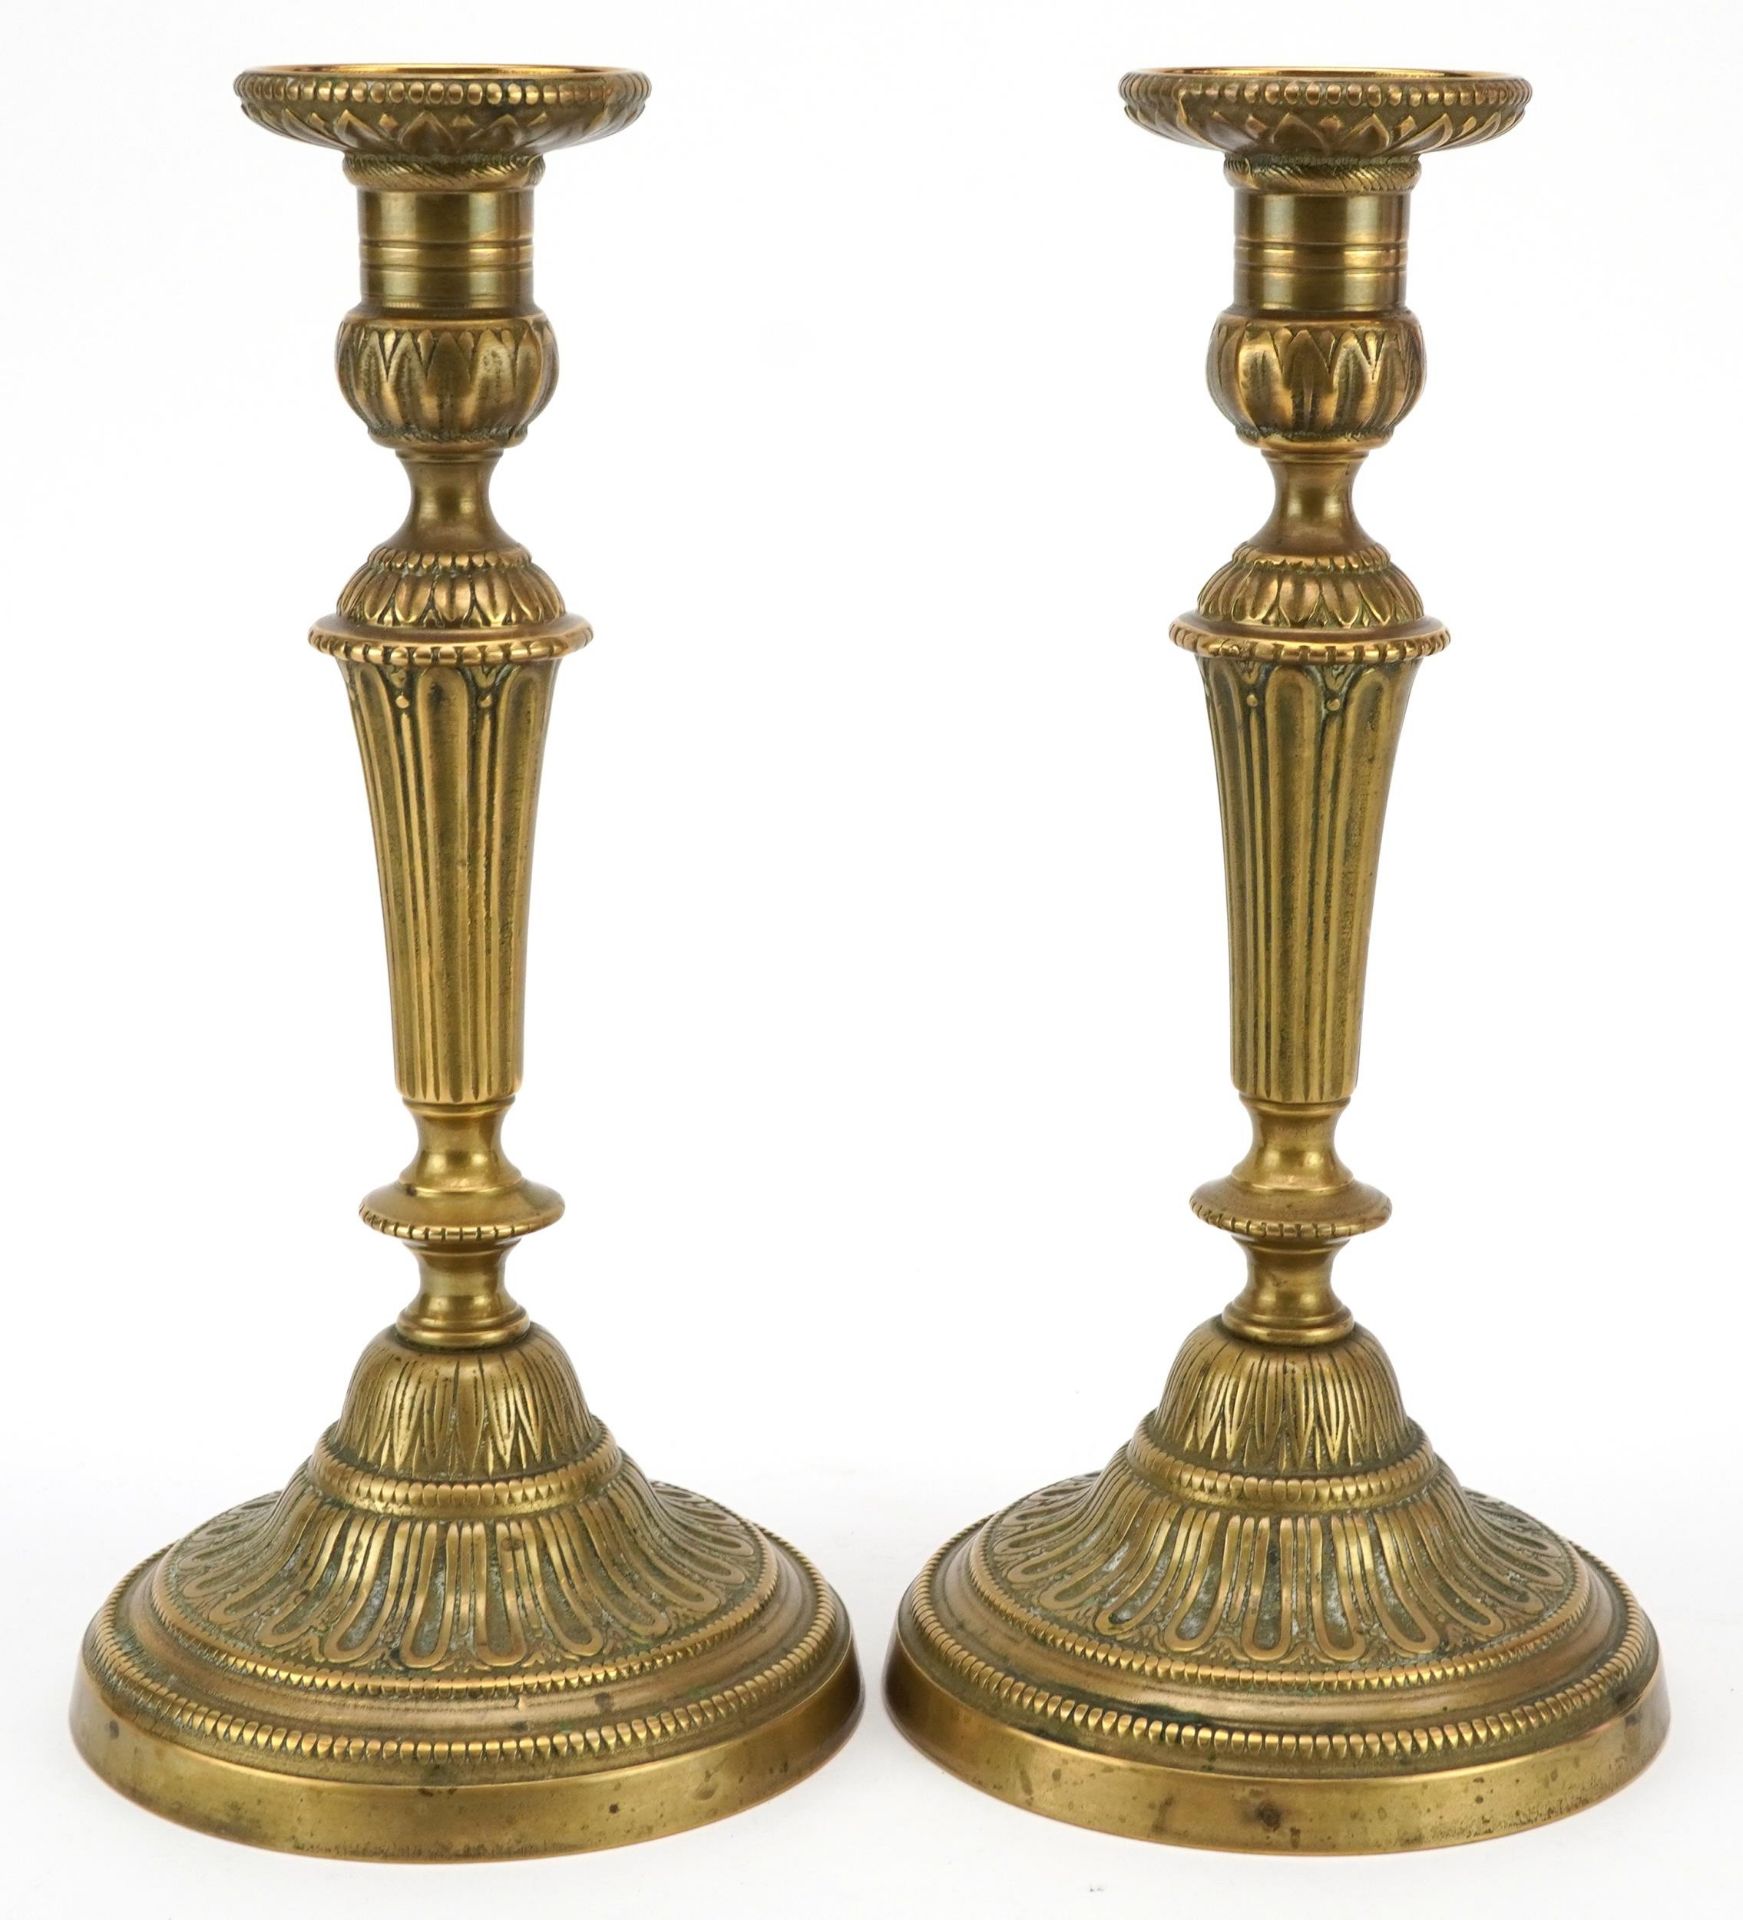 Pair of 19th century French turned brass candlesticks, each 28cm high : For further information on